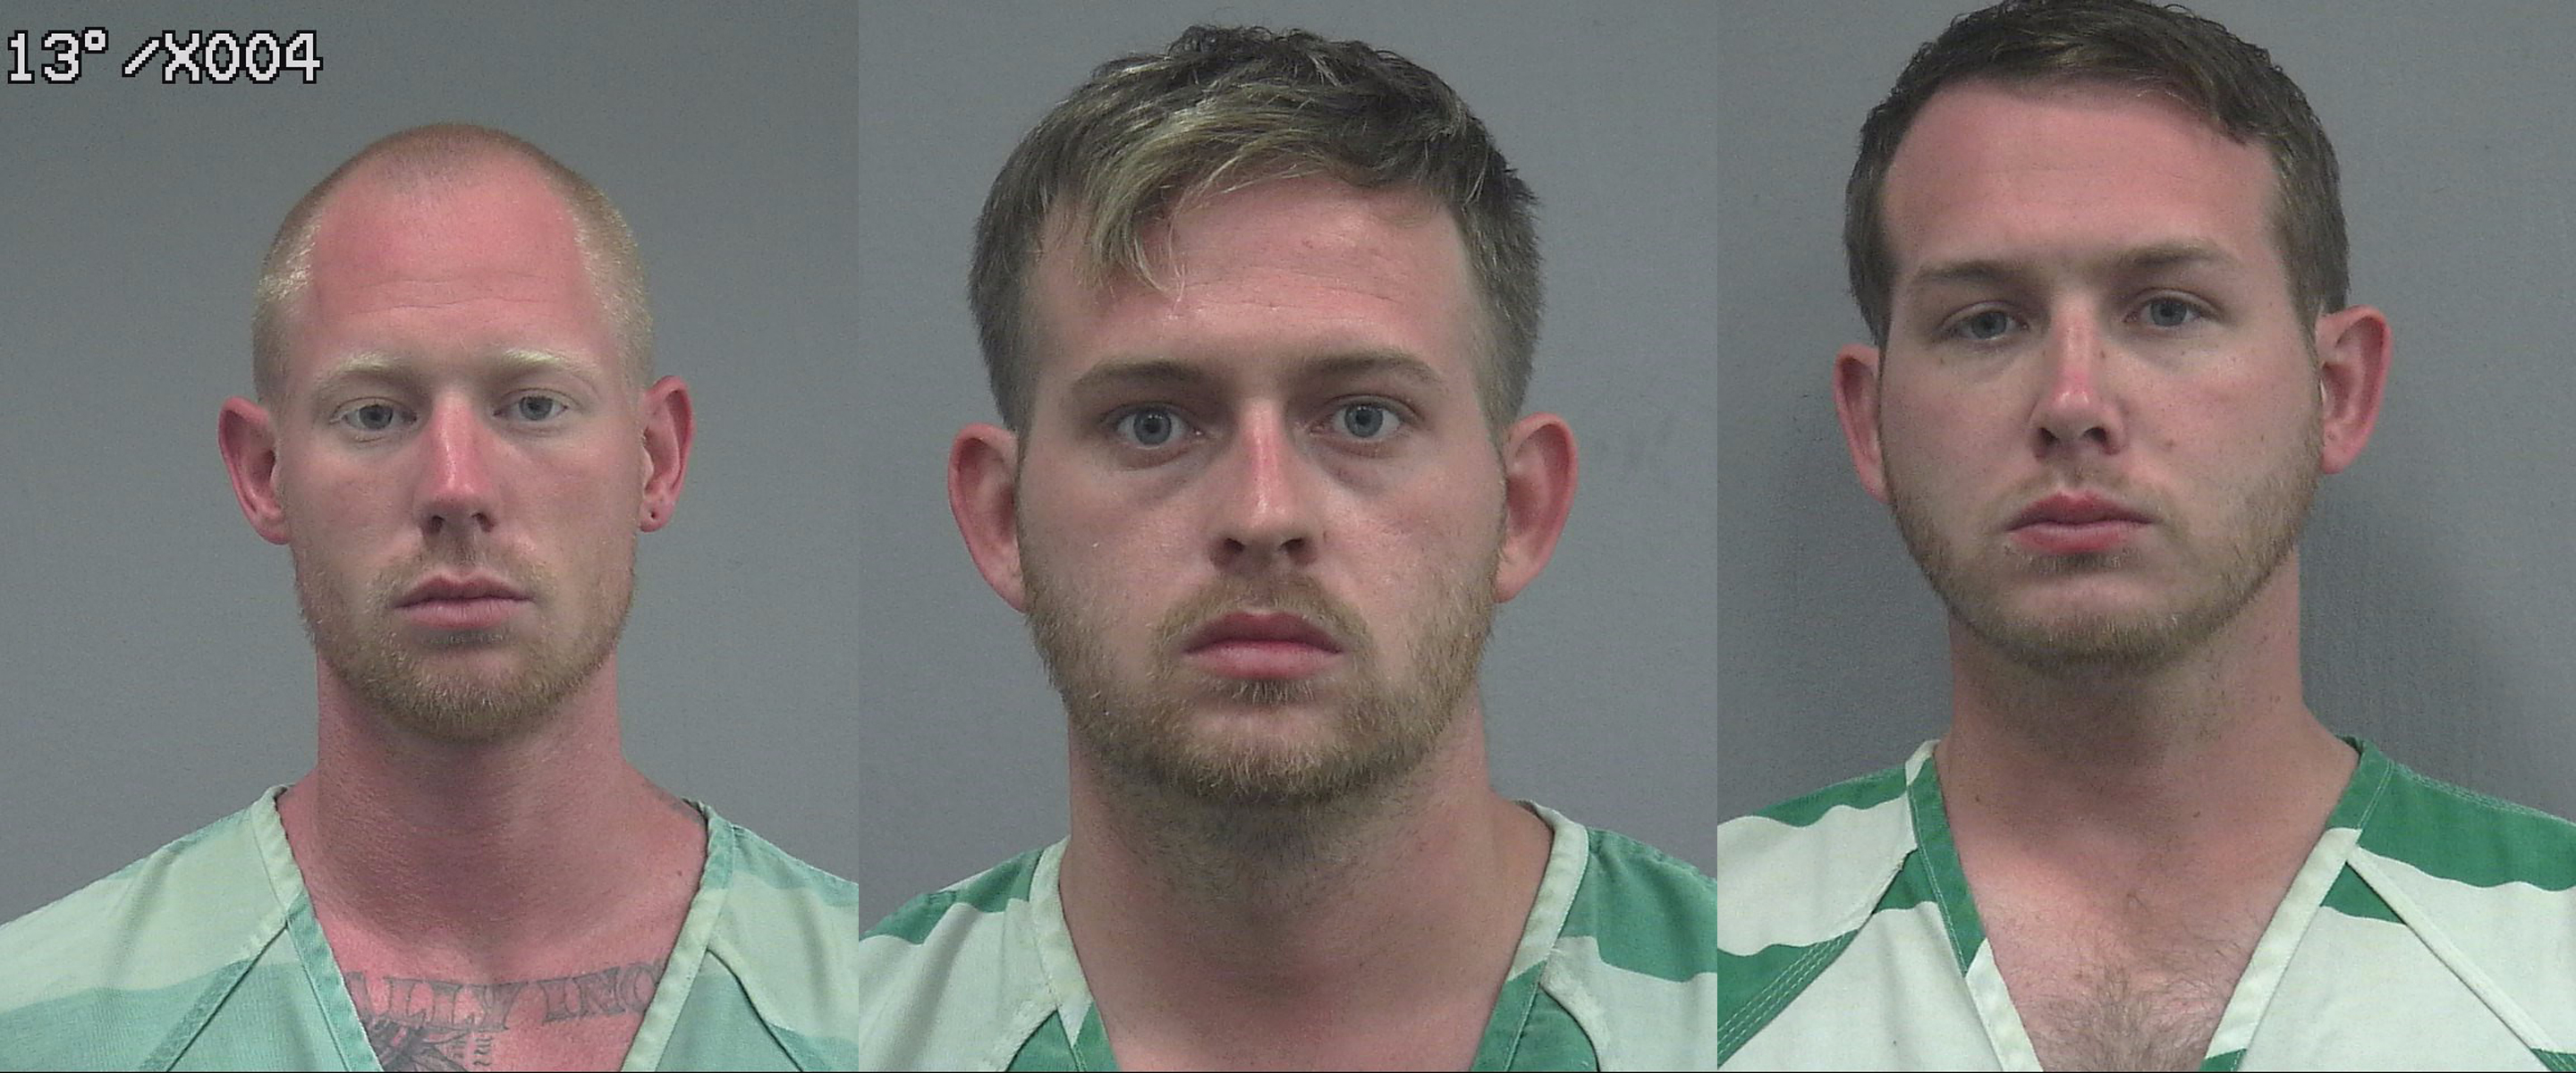 From left to right: Tyler Tenbrink, Colton Fears and William Fears (Courtesy of Gainesville Police Department)